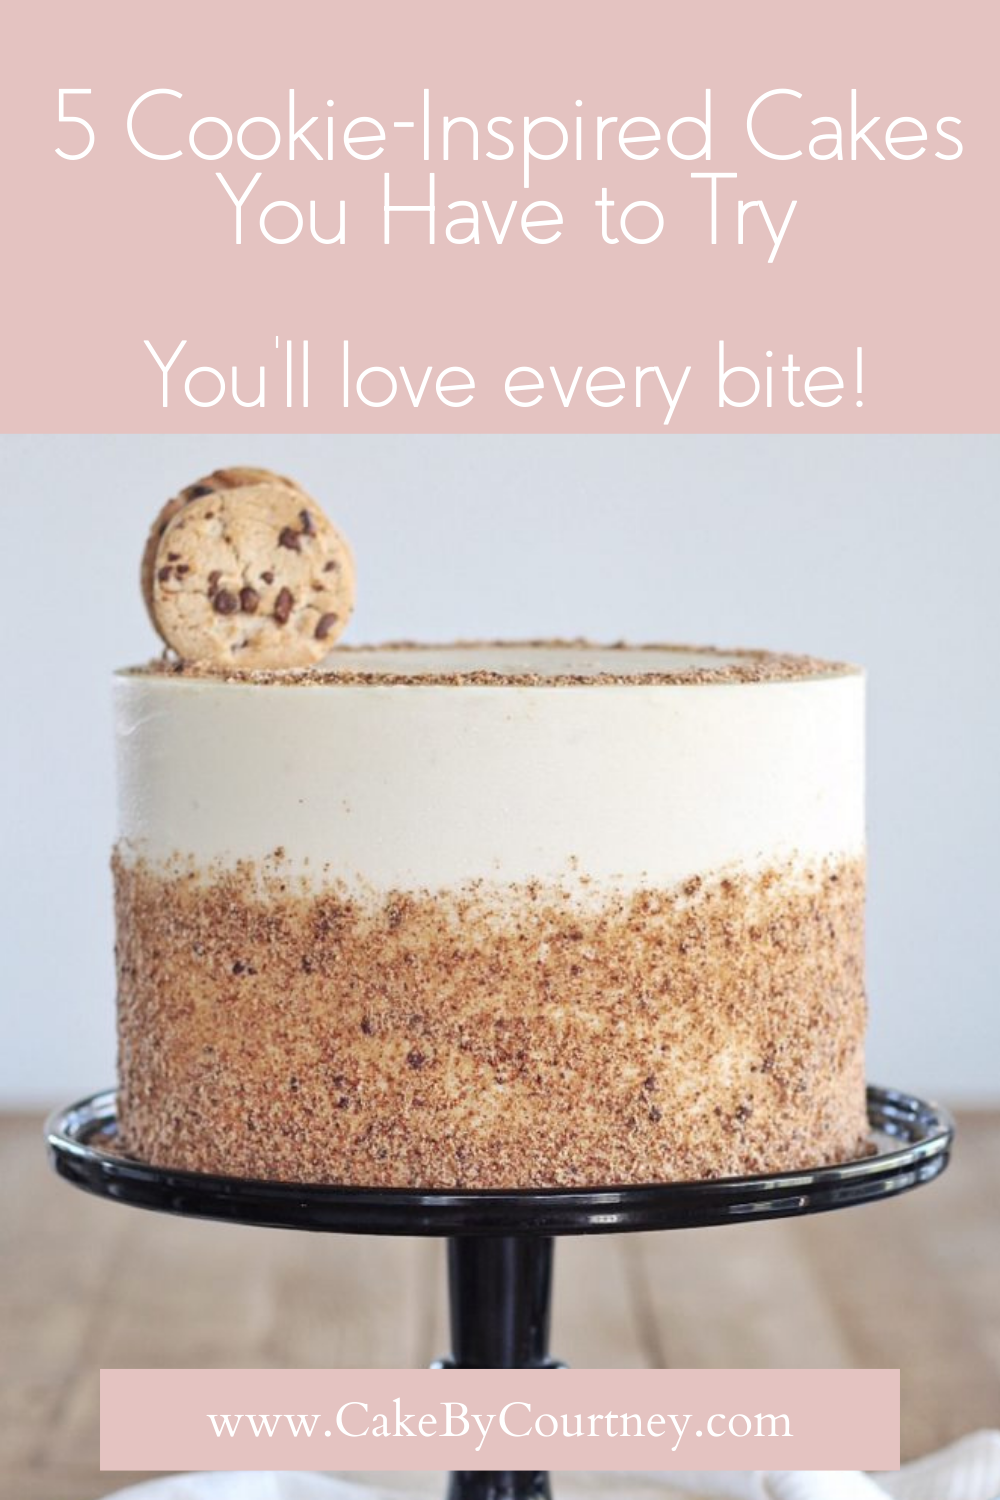 5 cookie-inspired cakes you have to try. www.cakebycourtney.com